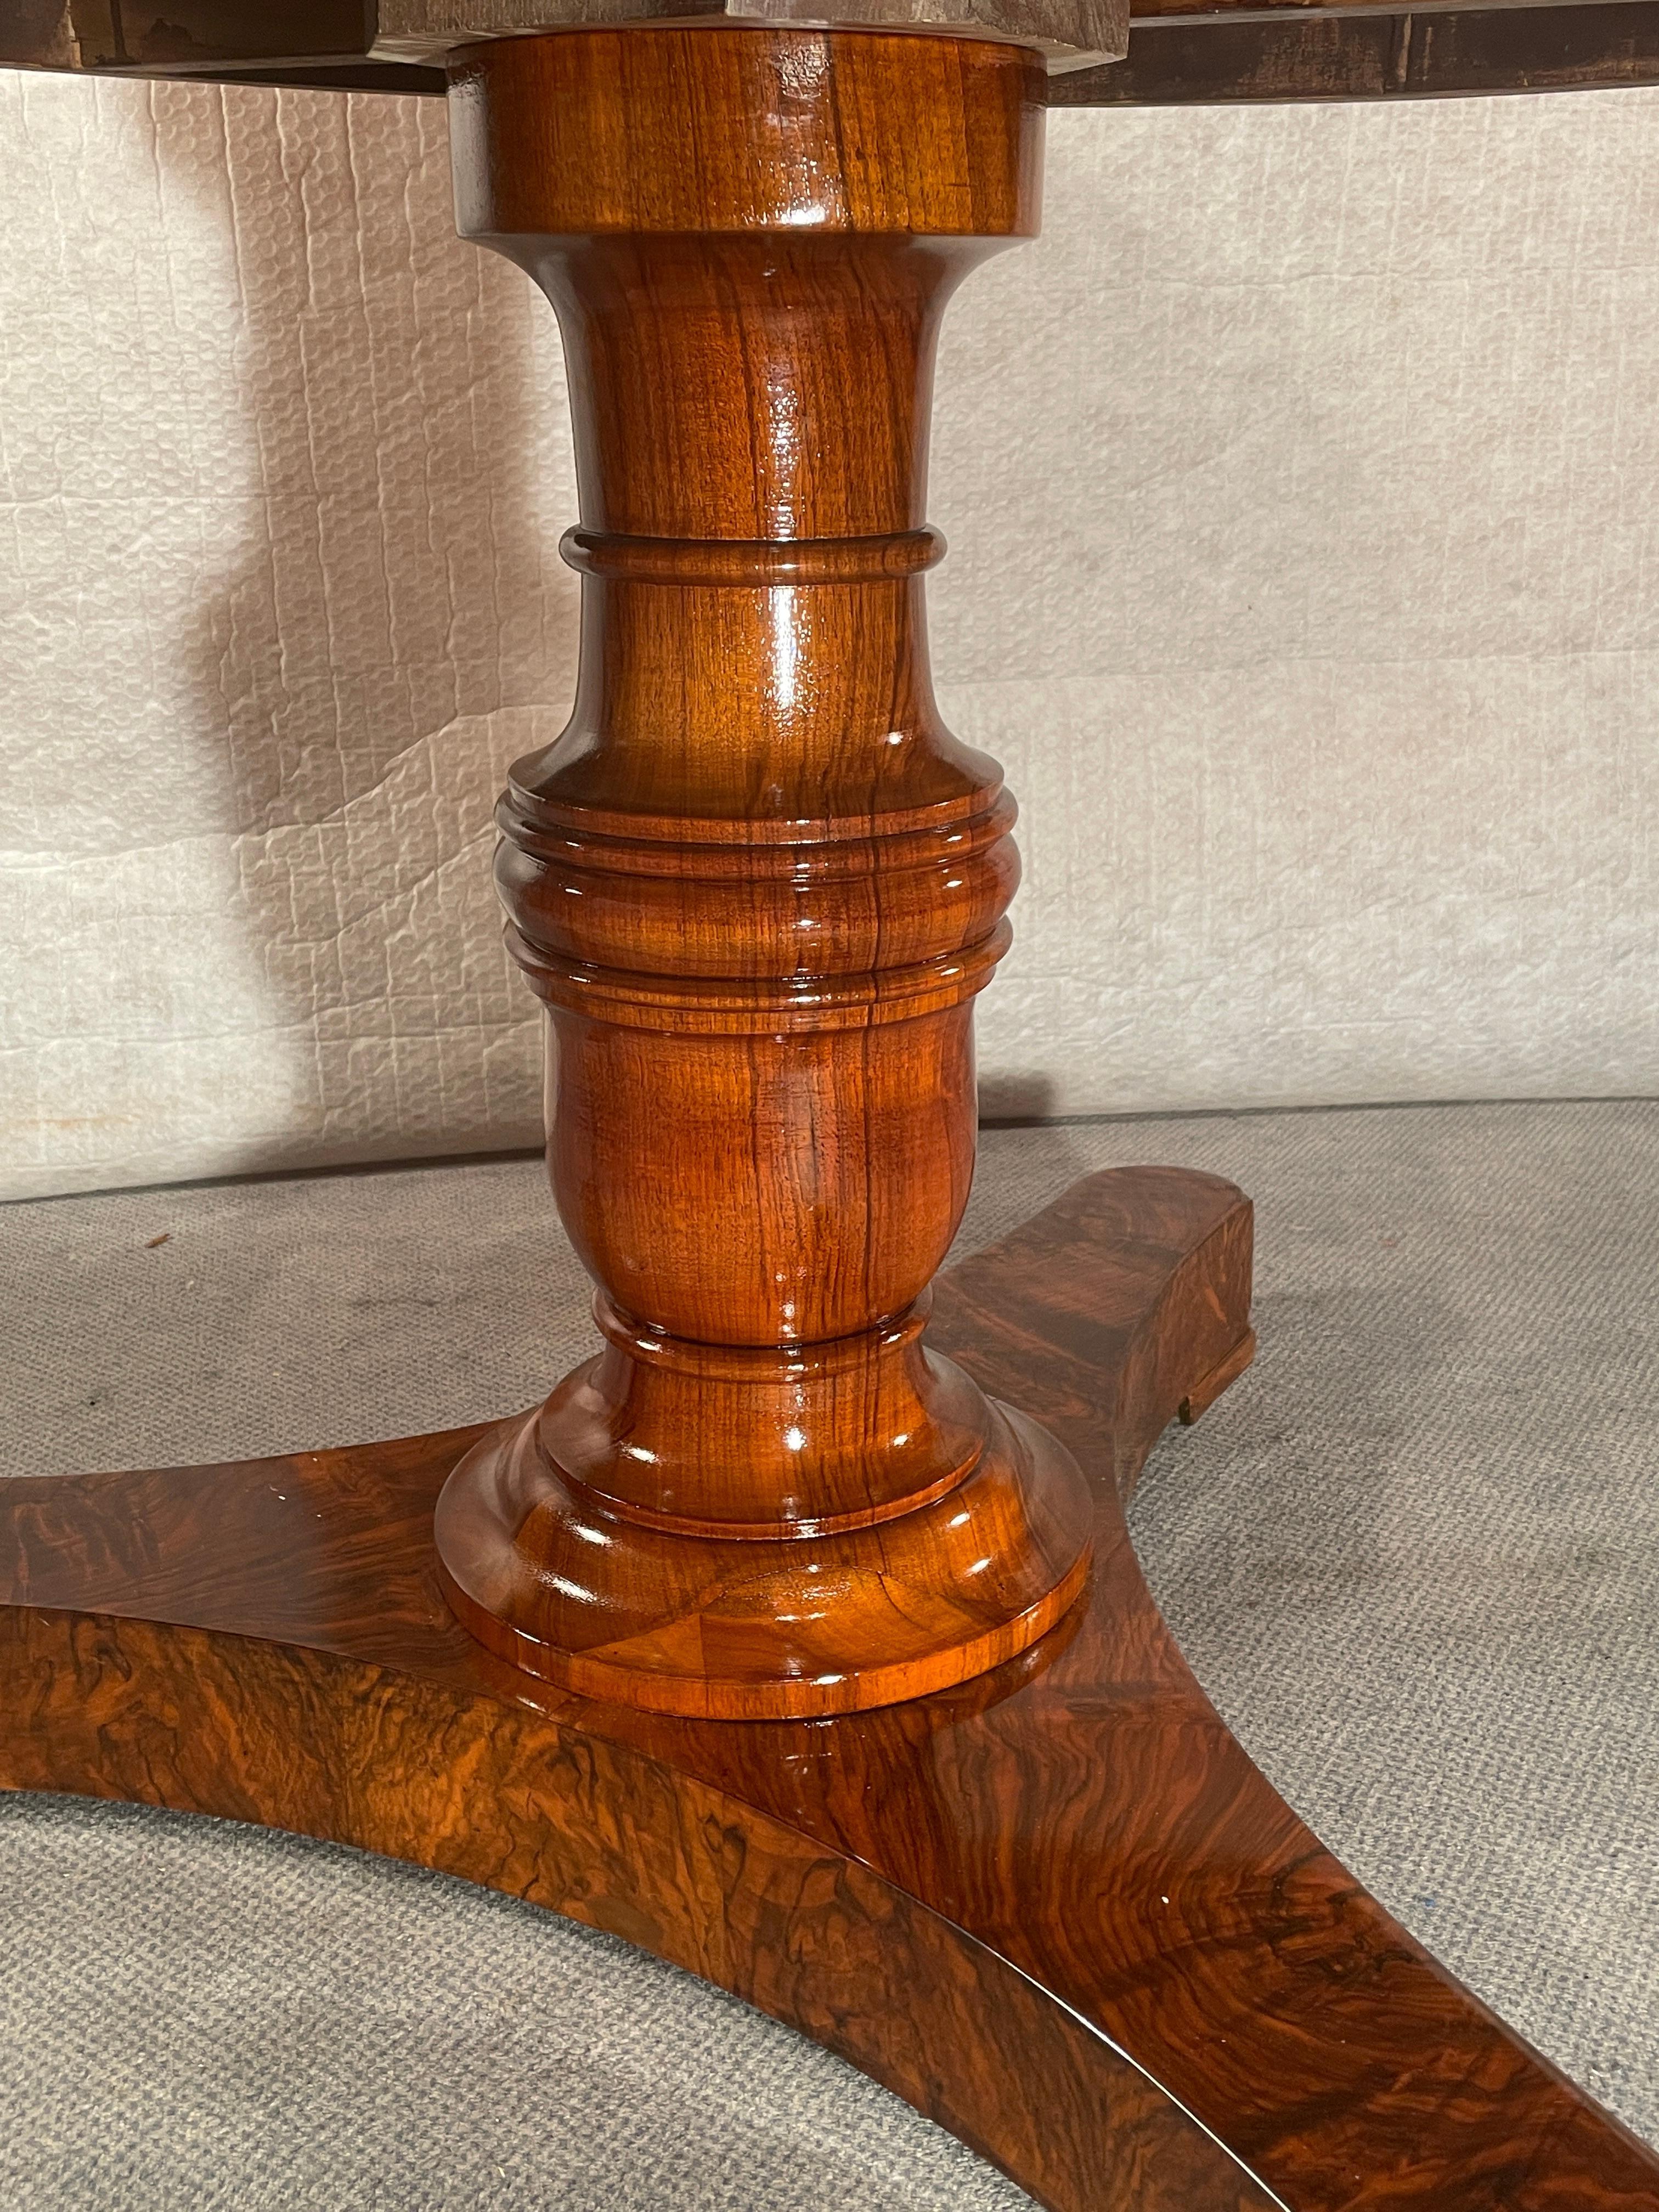 This gorgeous antique Biedermeier walnut table stands on a central baluster foot which rest on a trefoil base. The top has a very beautiful piecrust walnut root veneer. The trefoil base has a beautifully matching walnut veneer. The design of the